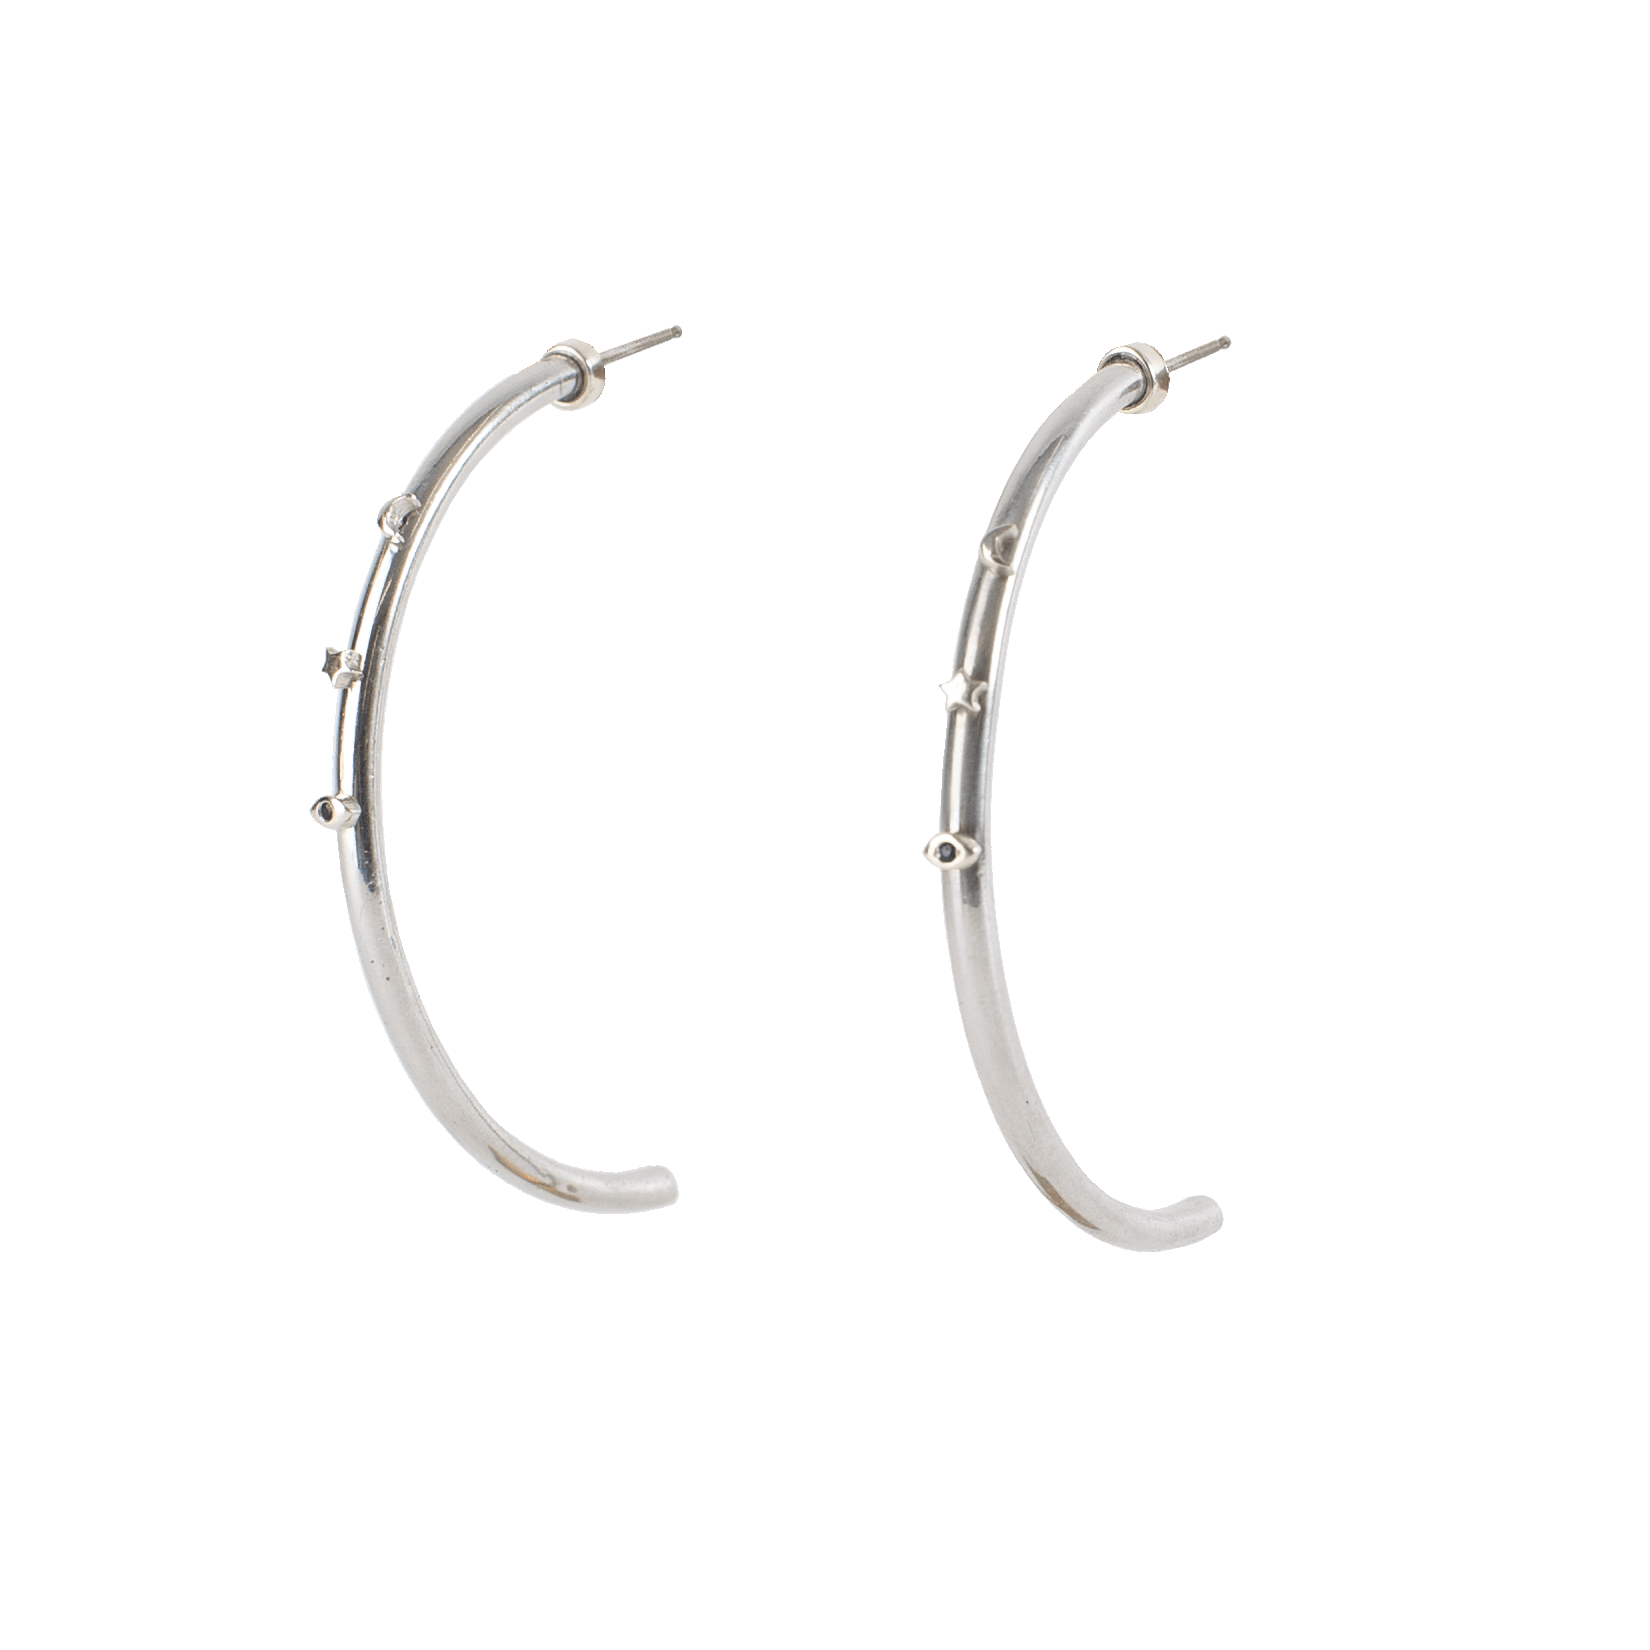 NEW COSMOS MOON, STAR, SAPPHIRE EYE Hoop Earringscategory_Accessories from ARTICLE22 - SHOPELEOS